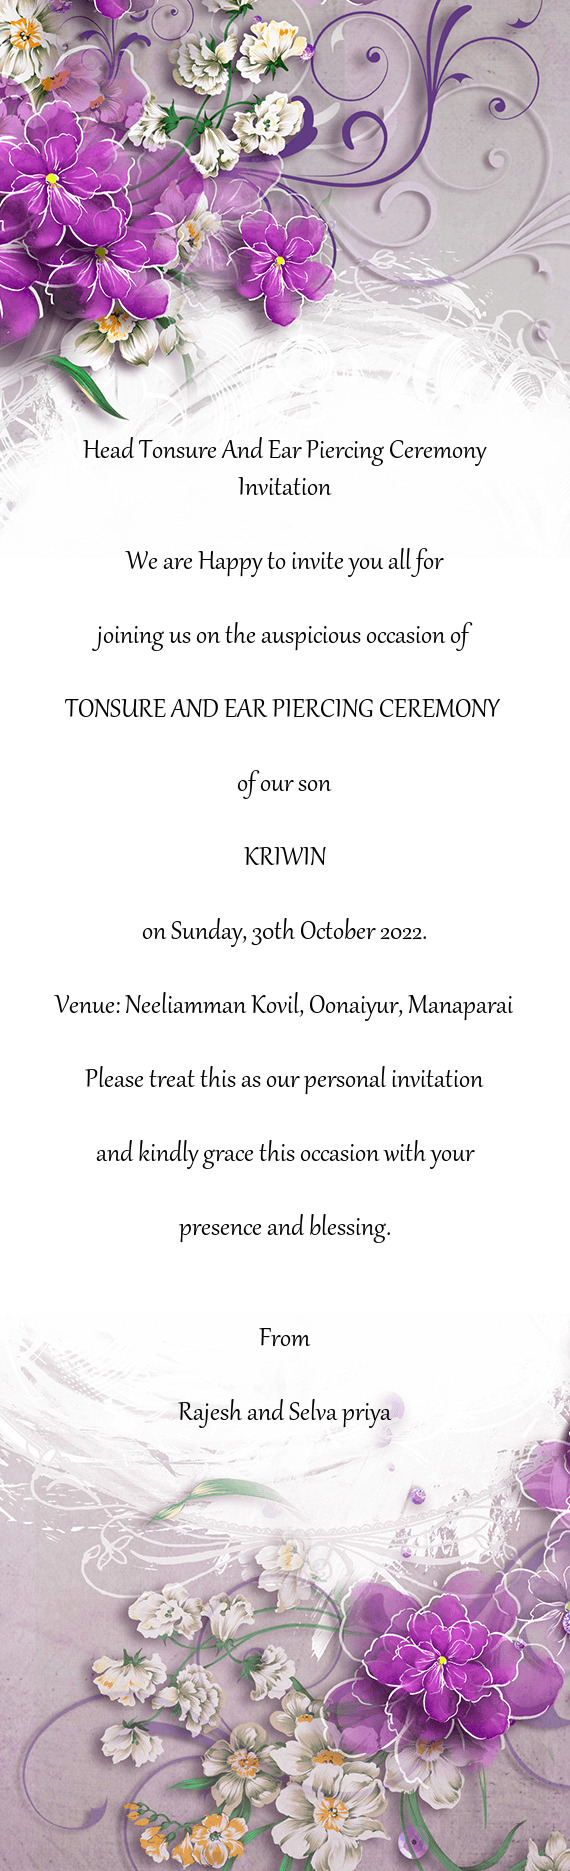 Head Tonsure And Ear Piercing Ceremony Invitation We are Happy to invite you all for joining u